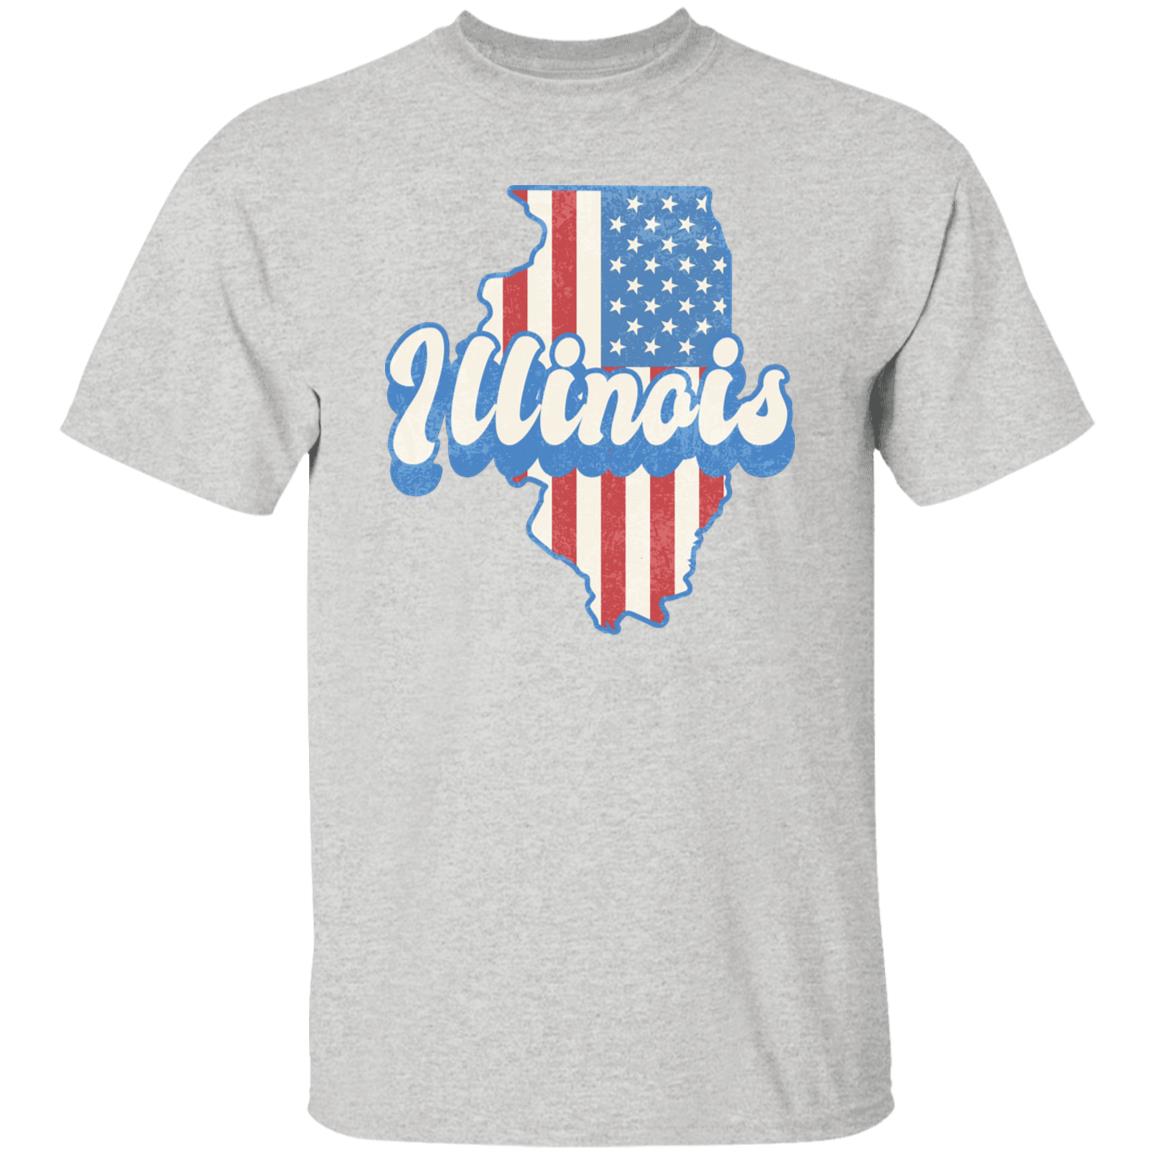 Illinois US flag Unisex T-Shirt American patriotic IL state tee White Ash Blue-Ash-Family-Gift-Planet